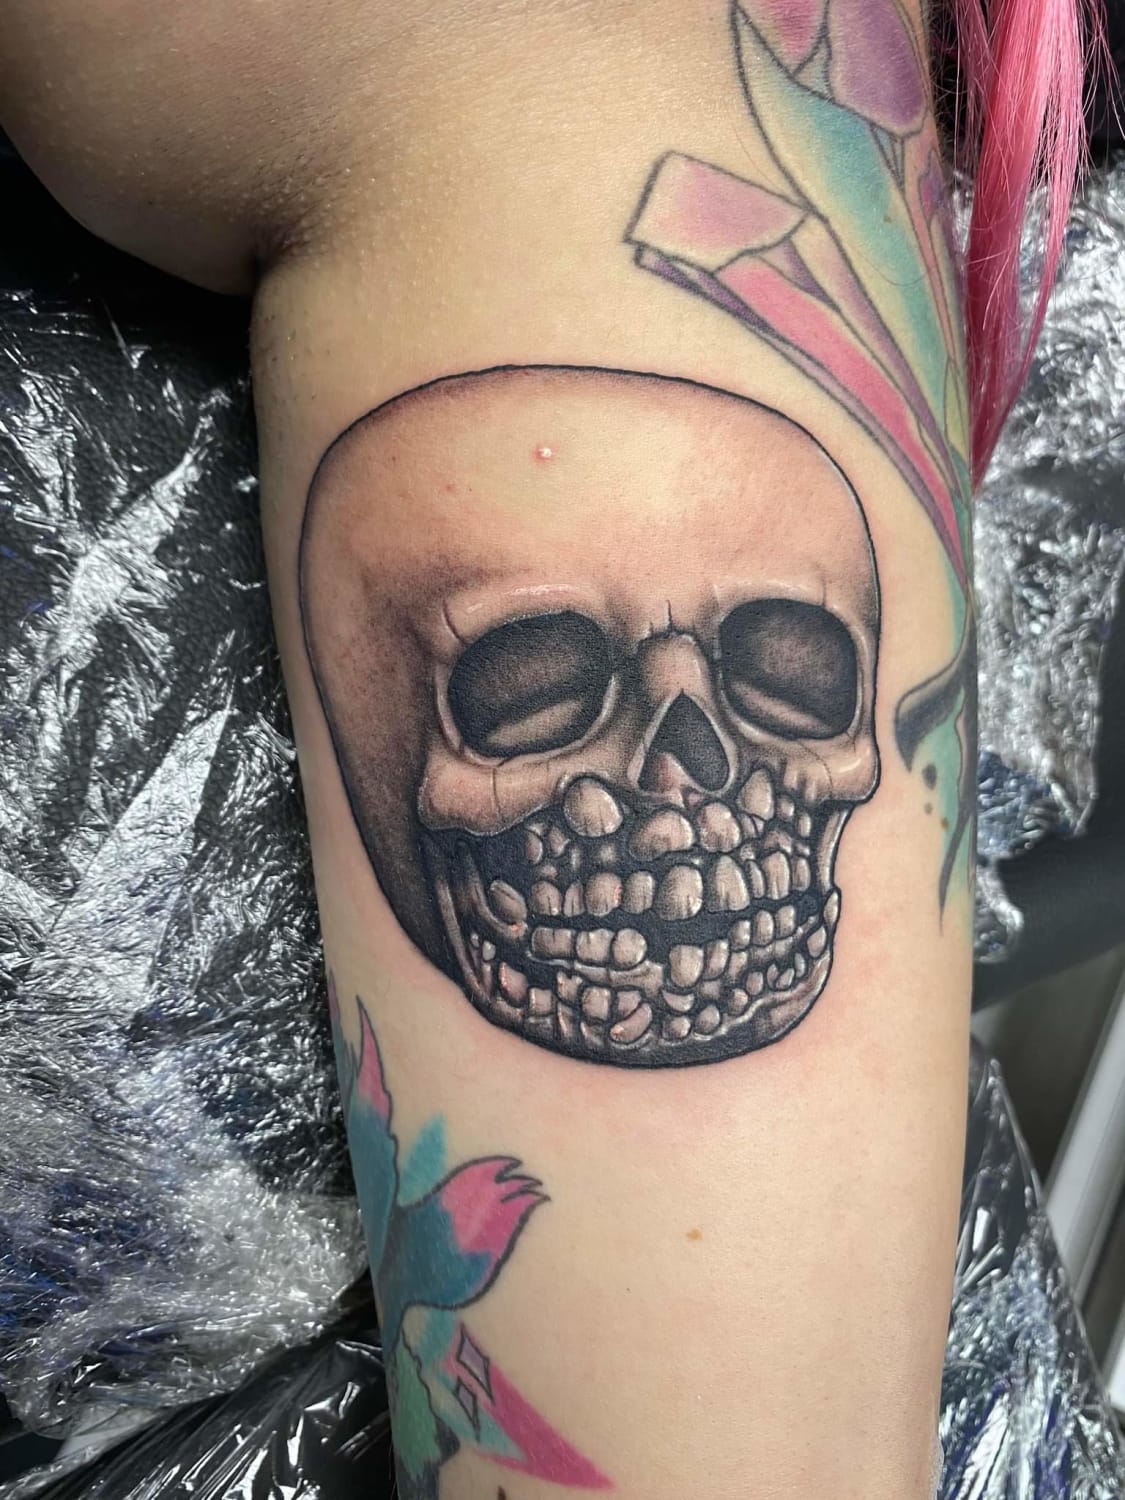 Toddler Skull - Done by Ethan at The Enchanted Dragon (Tucson, AZ)